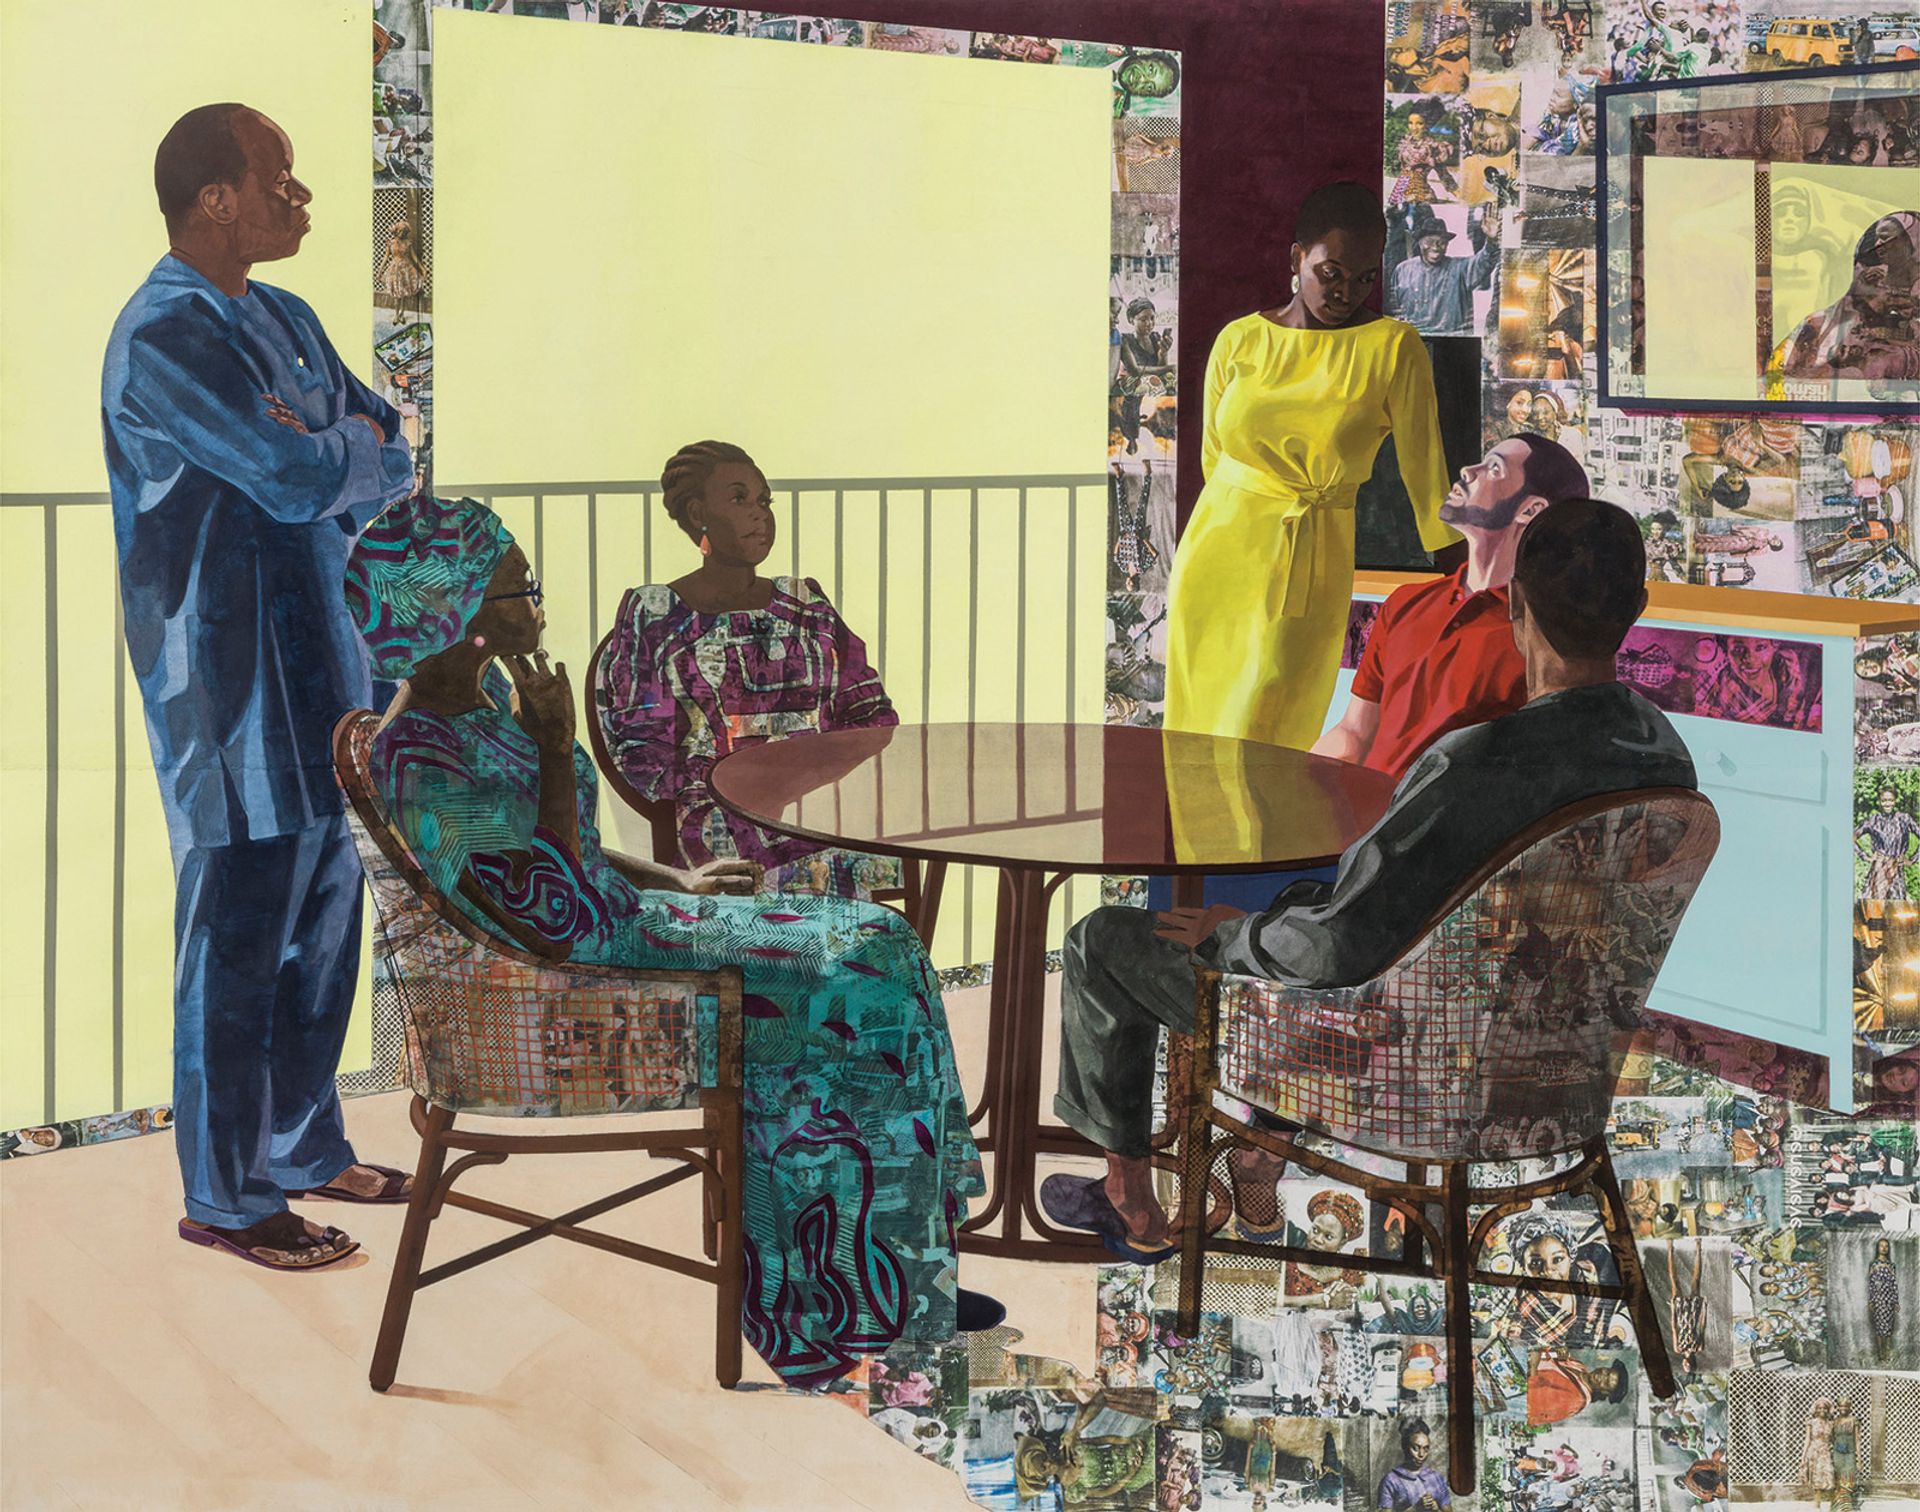 I Still Face You (2015) by the Nigerian-born, US-based artist Njideka Akunyili Crosby is one of the contemporary works in the show. Akunyili Crosby’s works often feature scenes of family and friends in domestic situations. © the artist; courtesy of Victoria Miro and David Zwirner